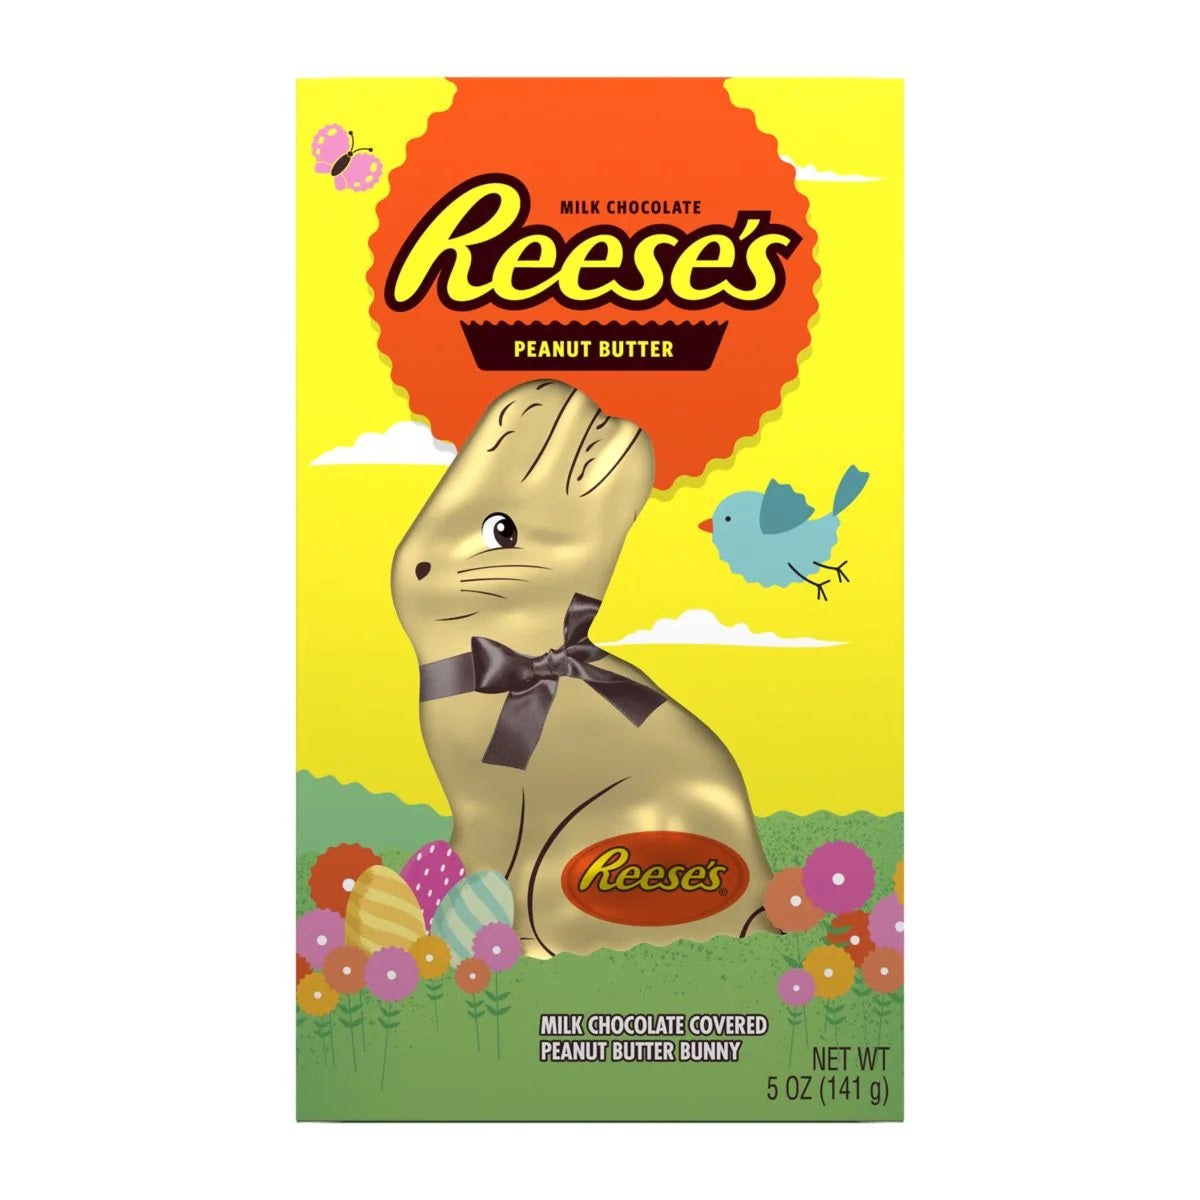 Reese's Milk Chocolate Covered Peanut Butter Bunny 5 oz